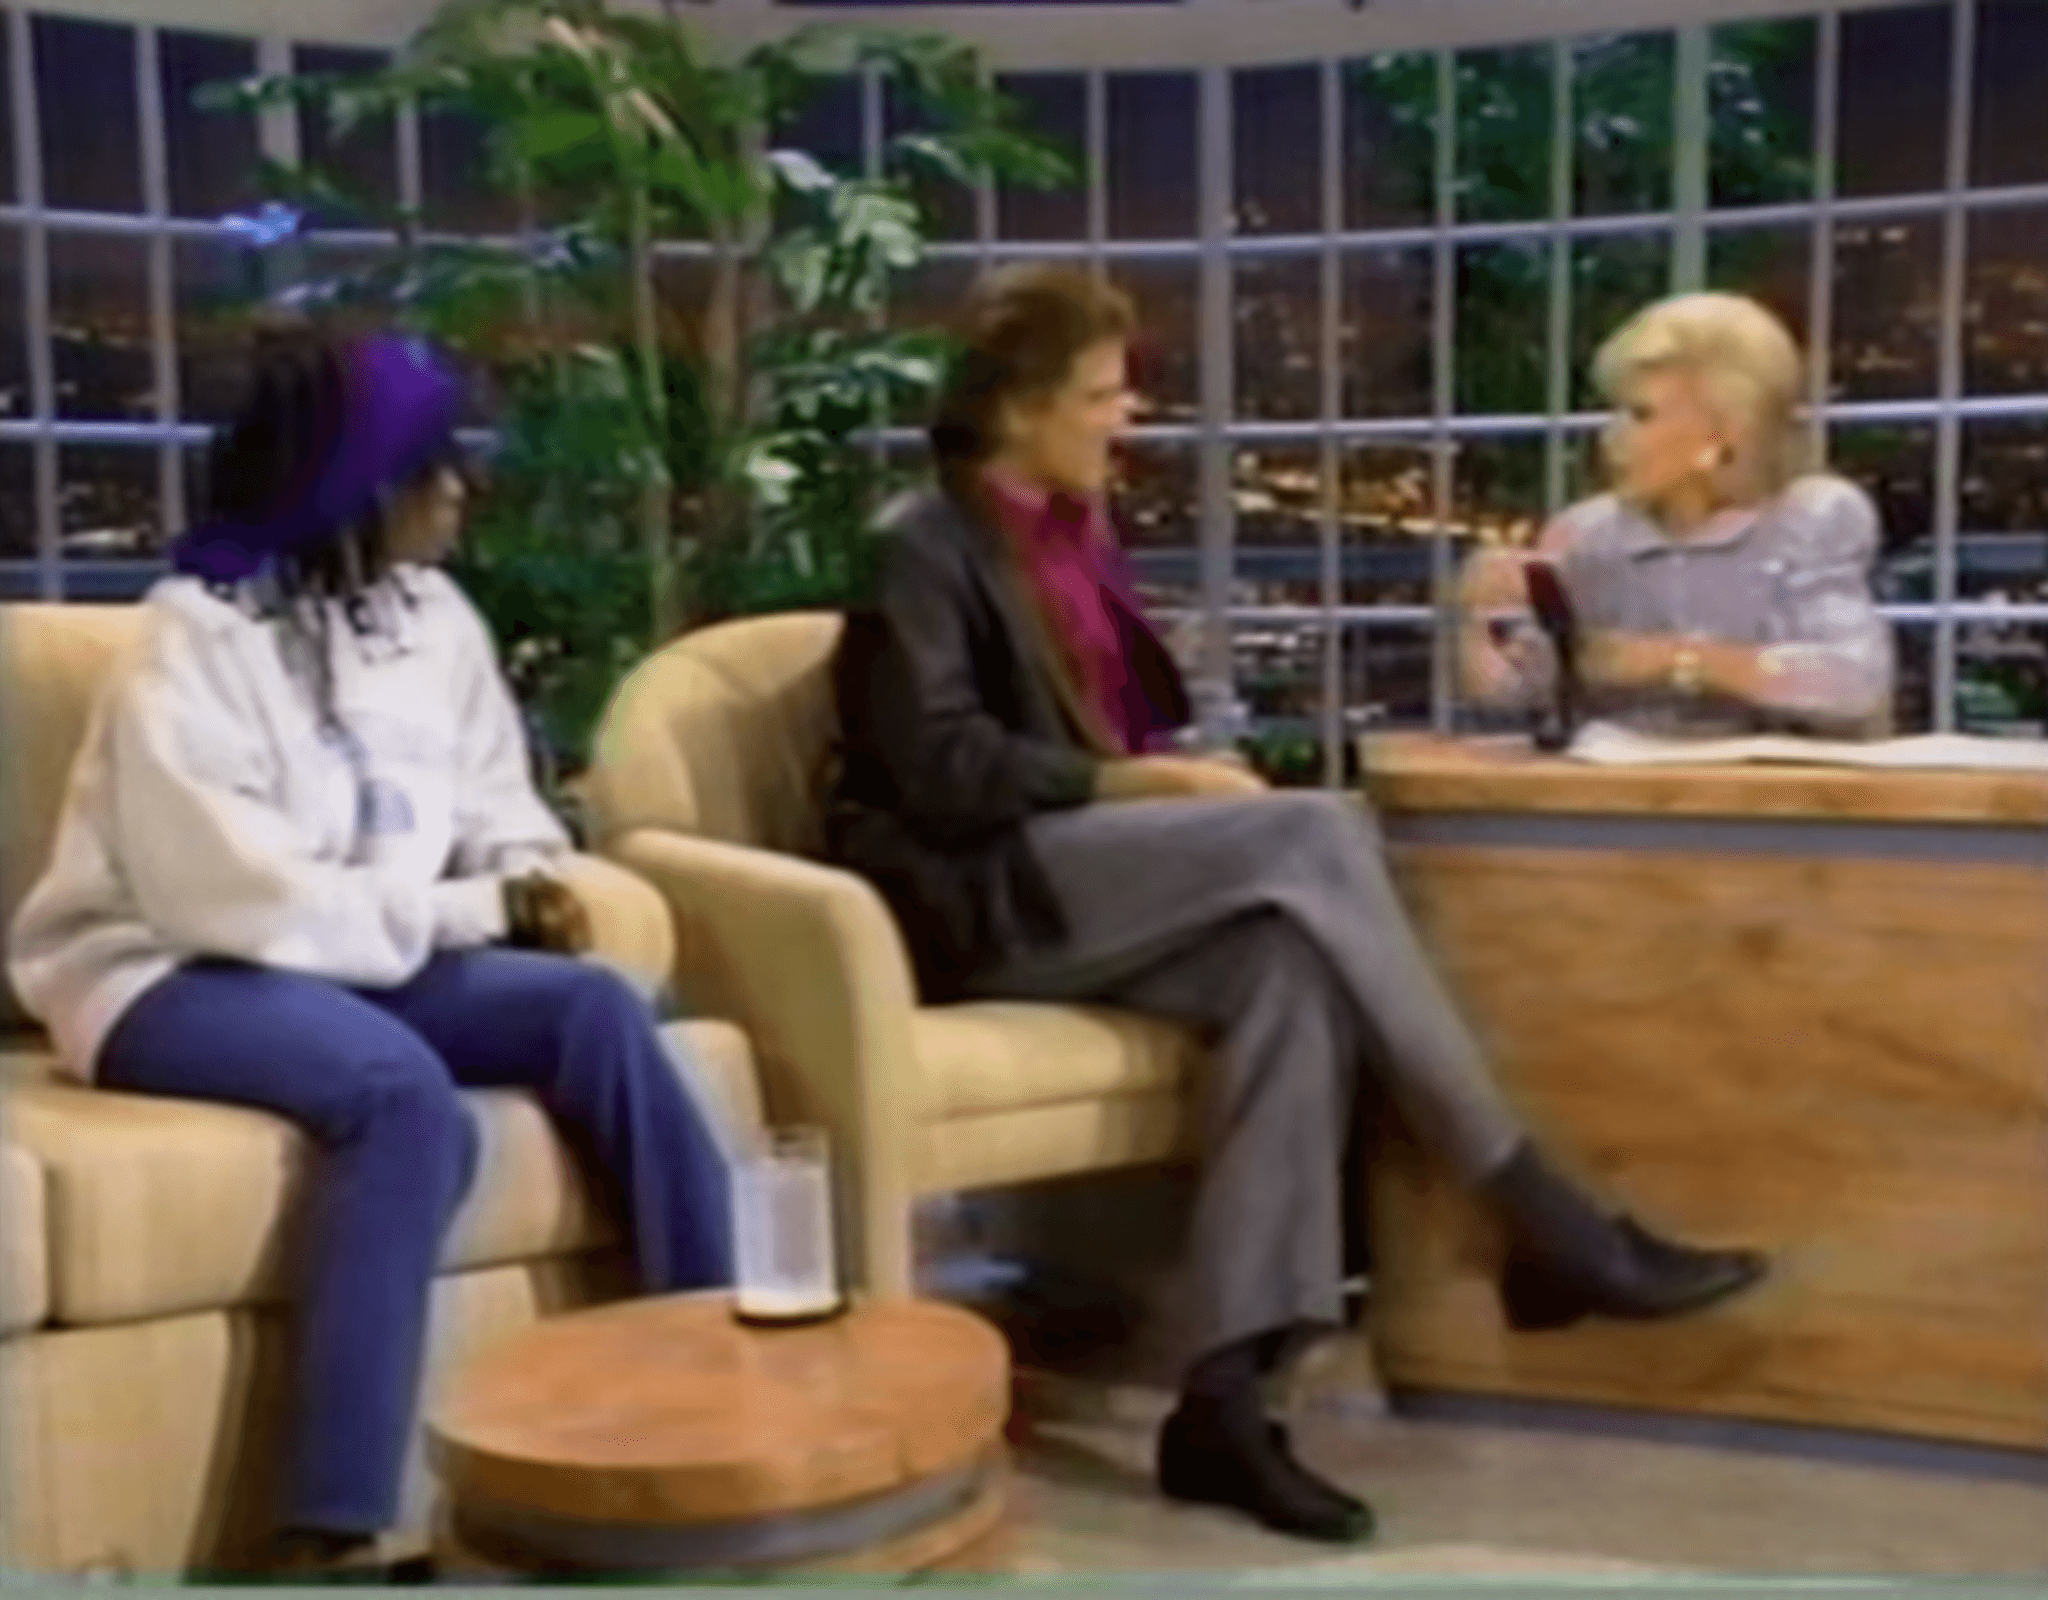 Ted affair danson and whoopi The truth